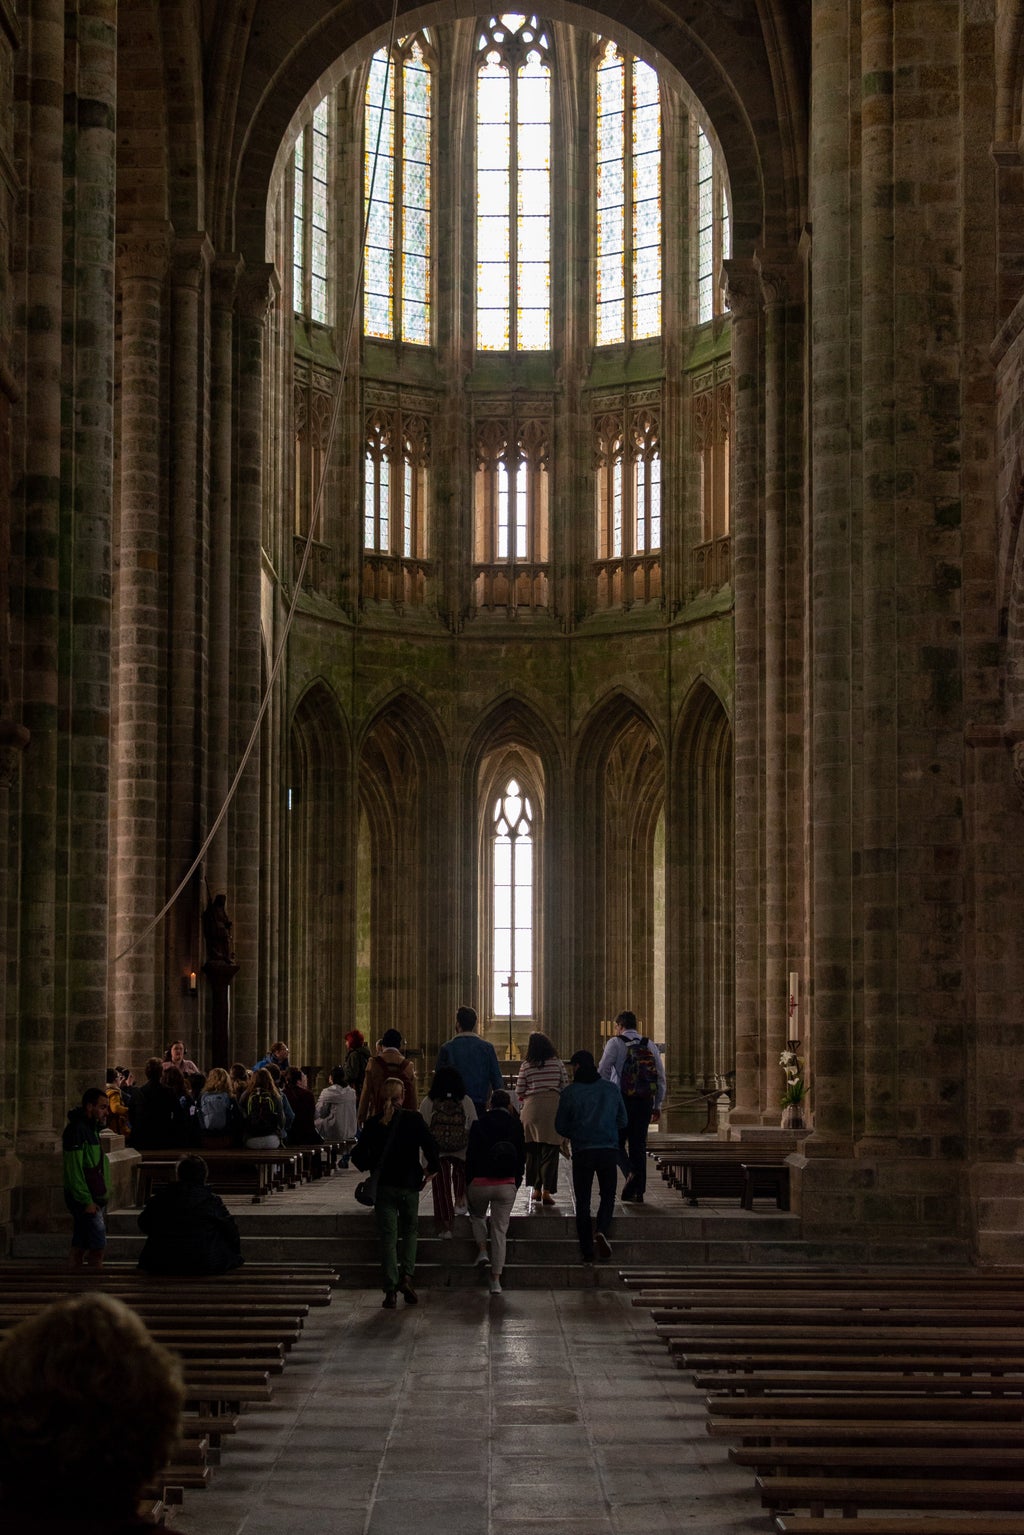 People standing inside a cathedral